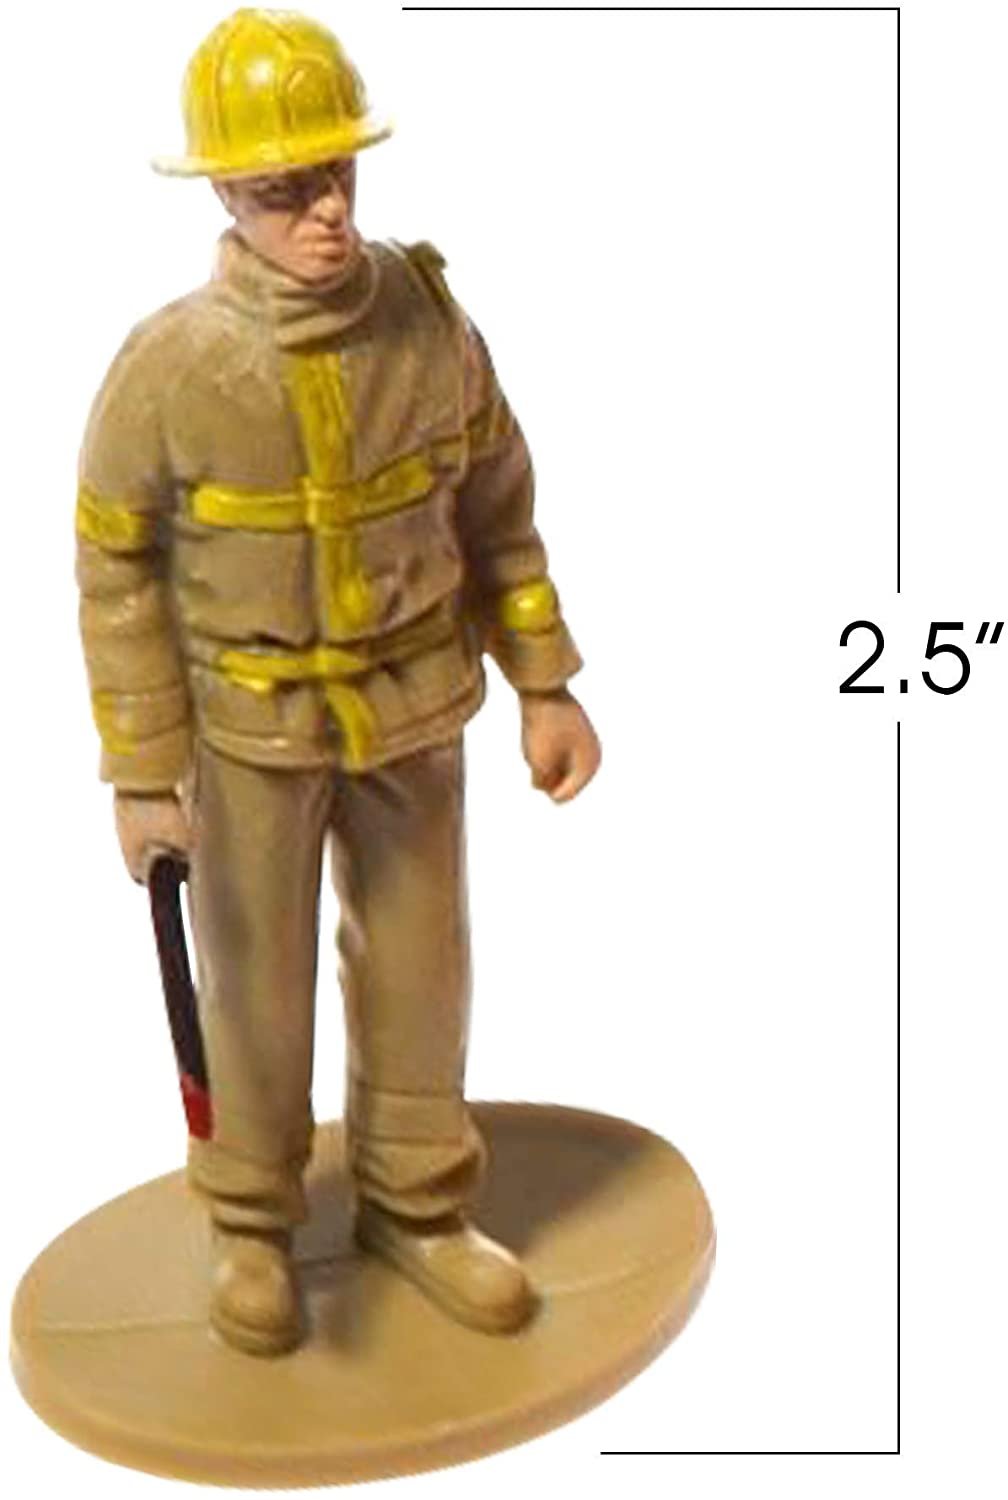 2.5" Mini Fireman Figurines for Kids - Set of 12 - Free Standing Firefighter Toys Figures - Birthday Party Favors for Boys and Girls, Goody Bag Fillers, Cake Toppers and Decorations